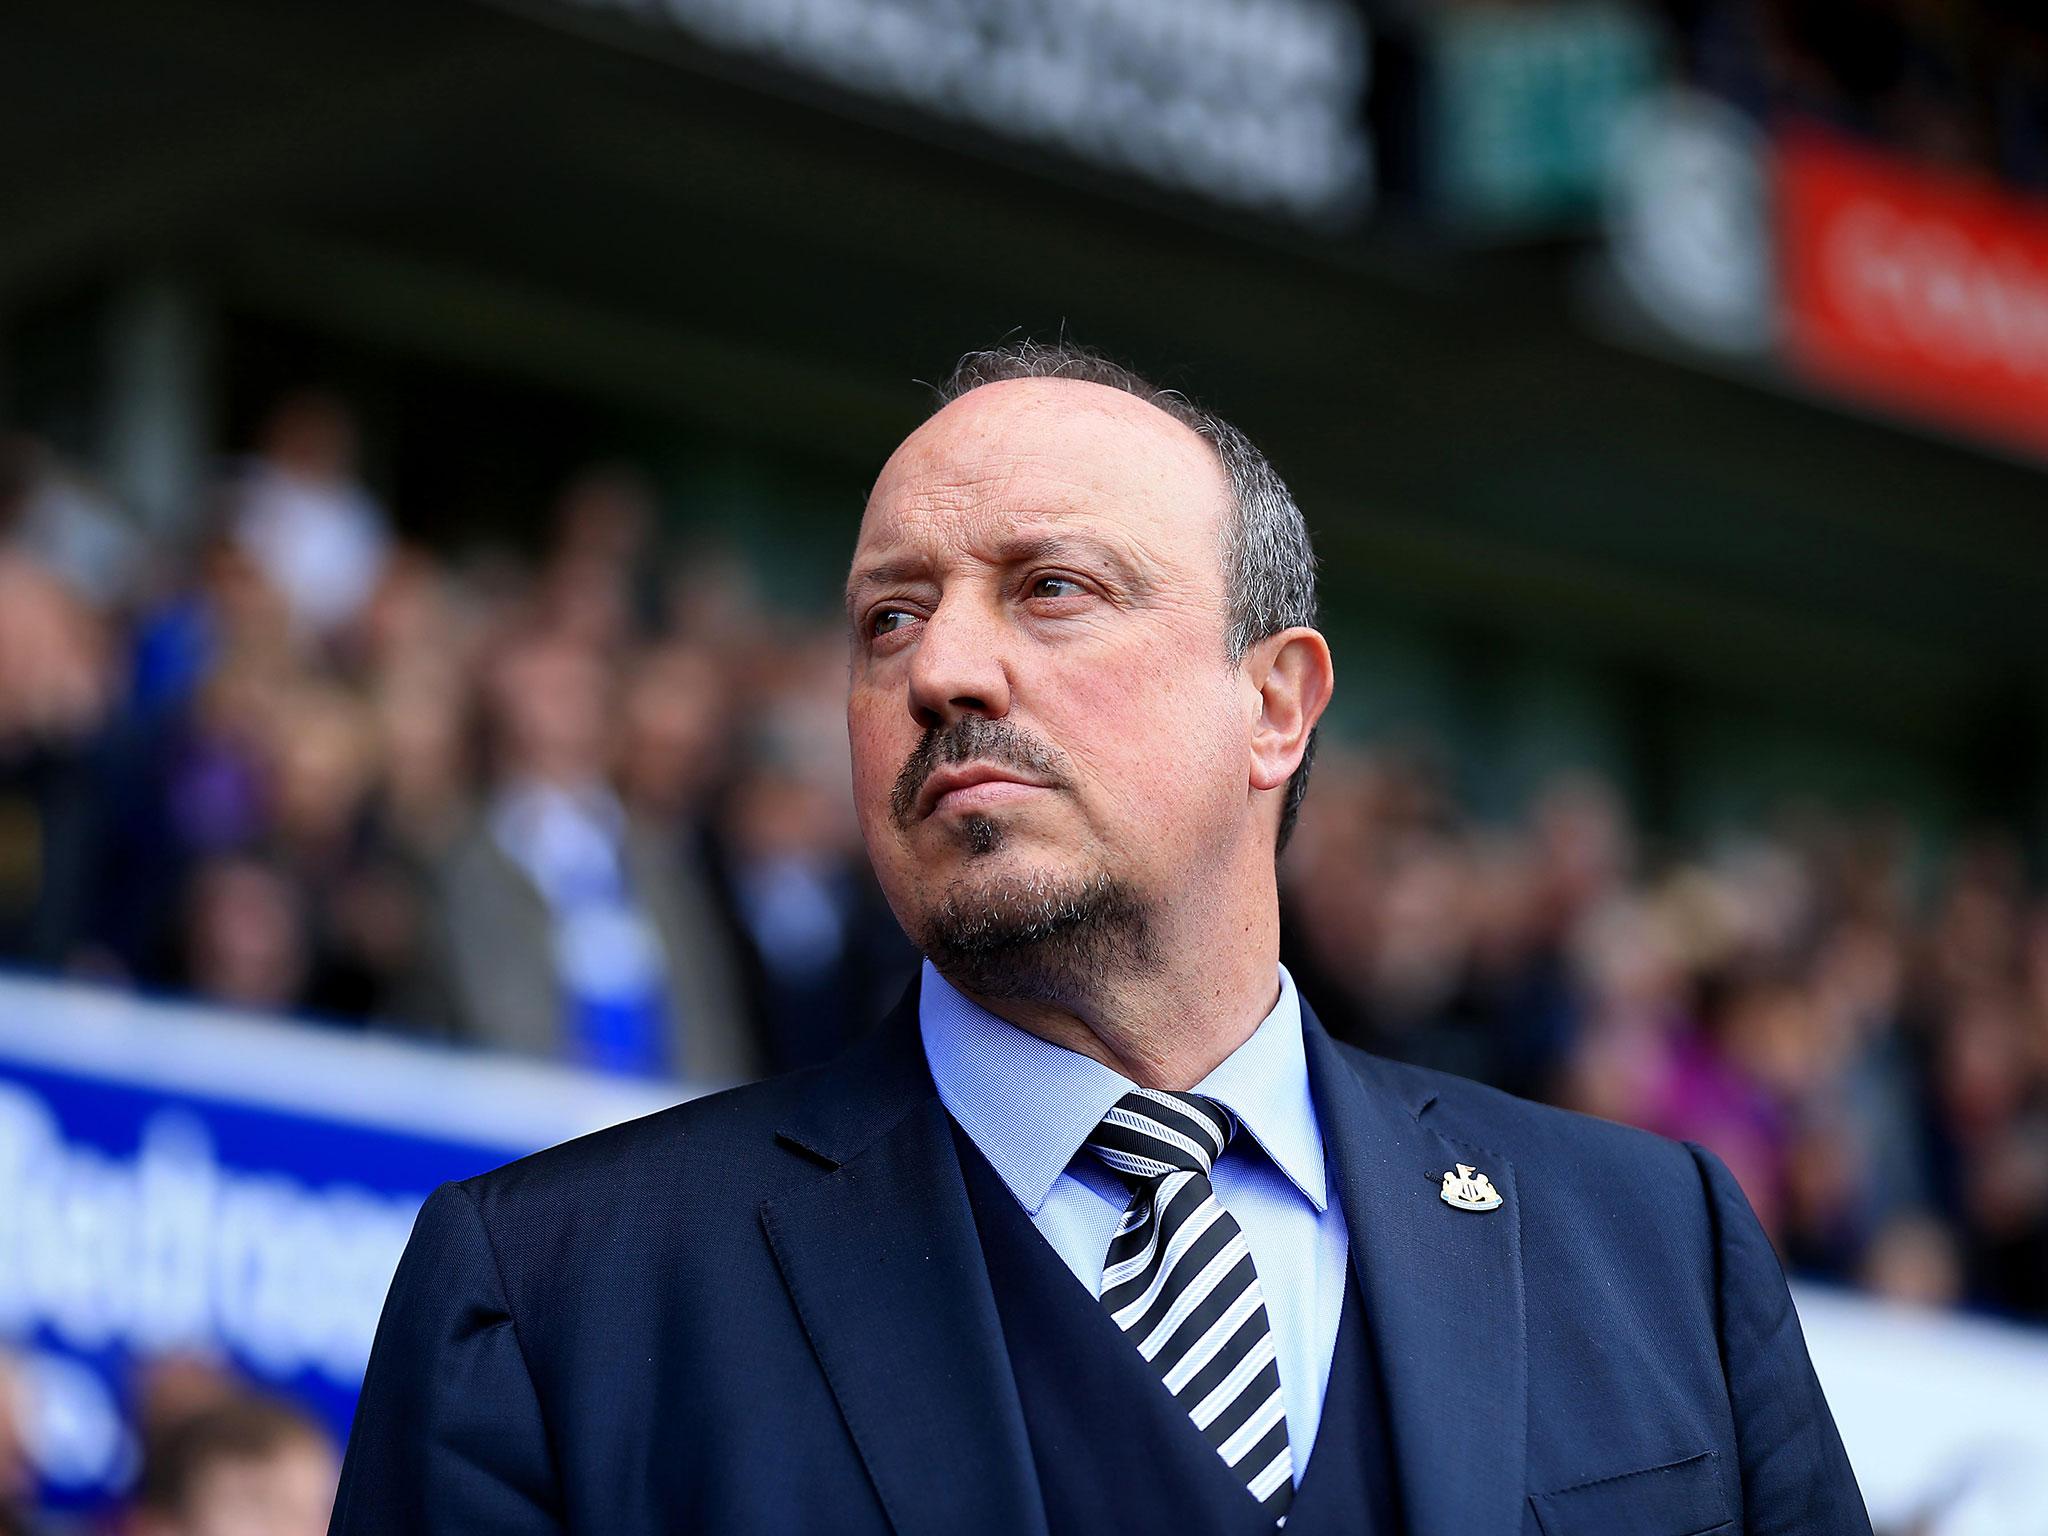 Benitez's next task is to make the club move quickly in the transfer market